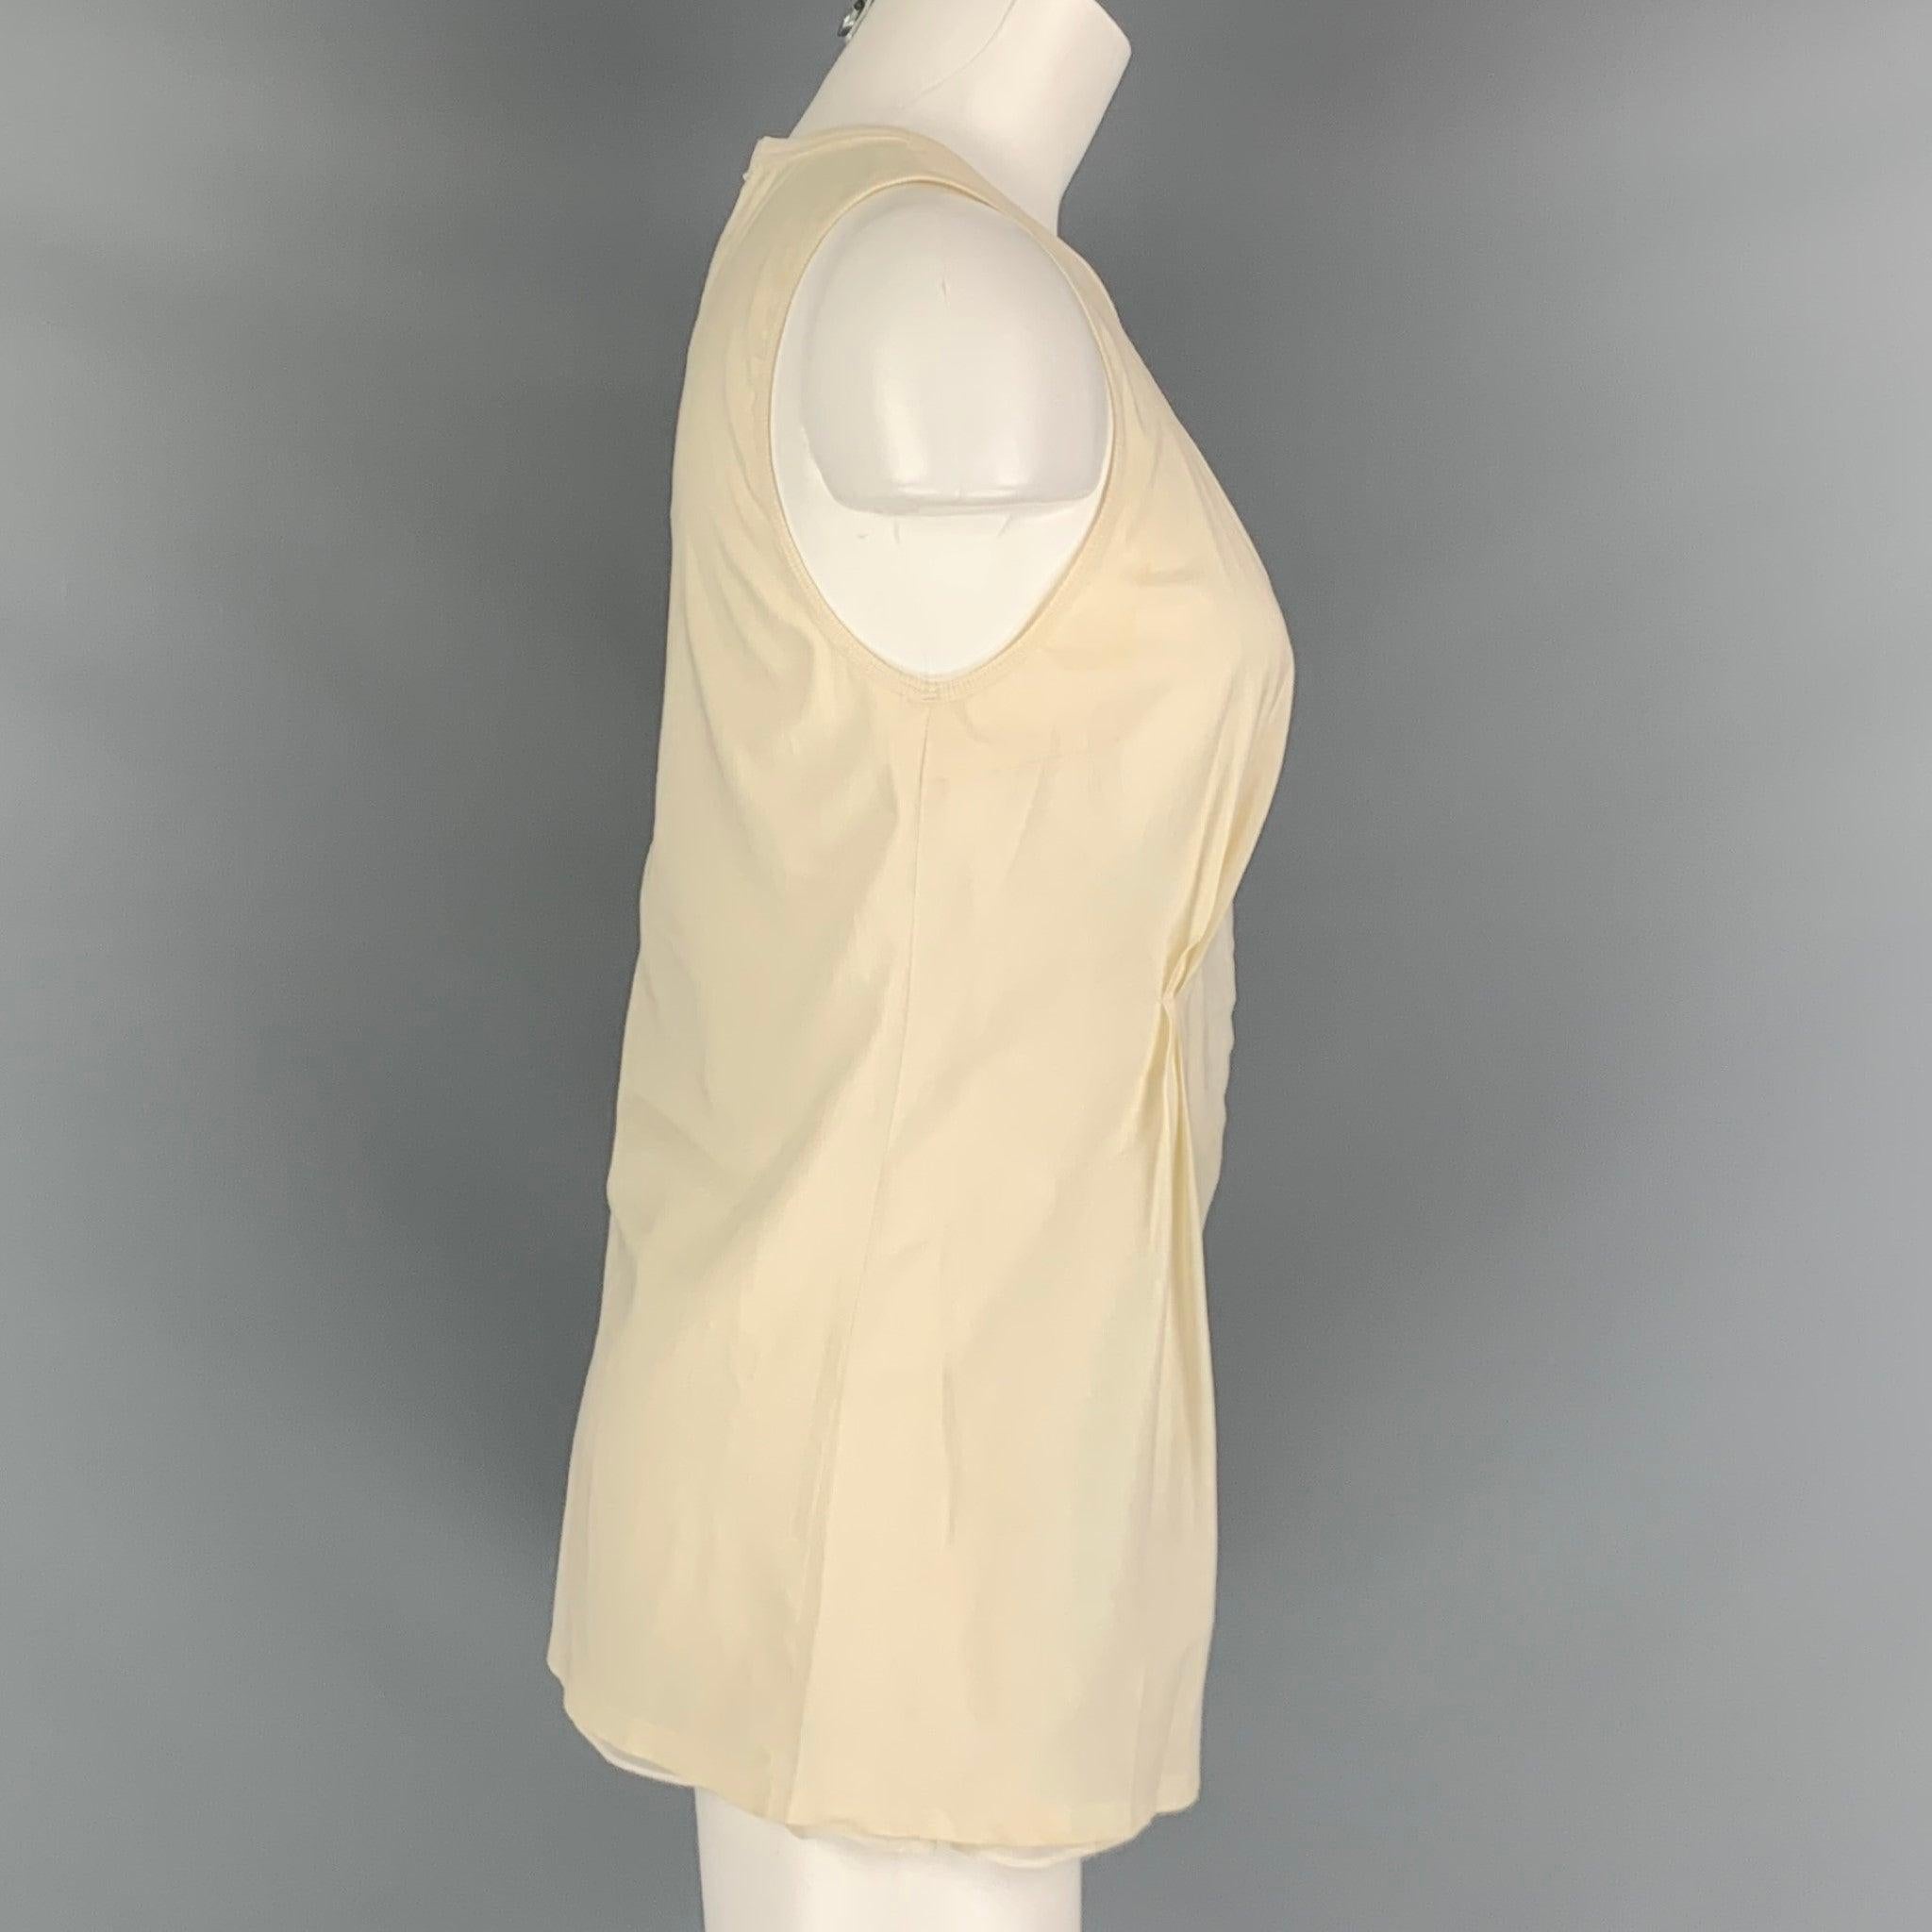 BRUNELLO CUCINELLI tank top comes in a cream woven material featuring an embroidered detail, and three rhinestones. Made in Italy.Good Pre-Owned Condition. Moderate marks throughout. As-Is. 

Marked:   L 

Measurements: 
  Bust: 32 inches Length: 27